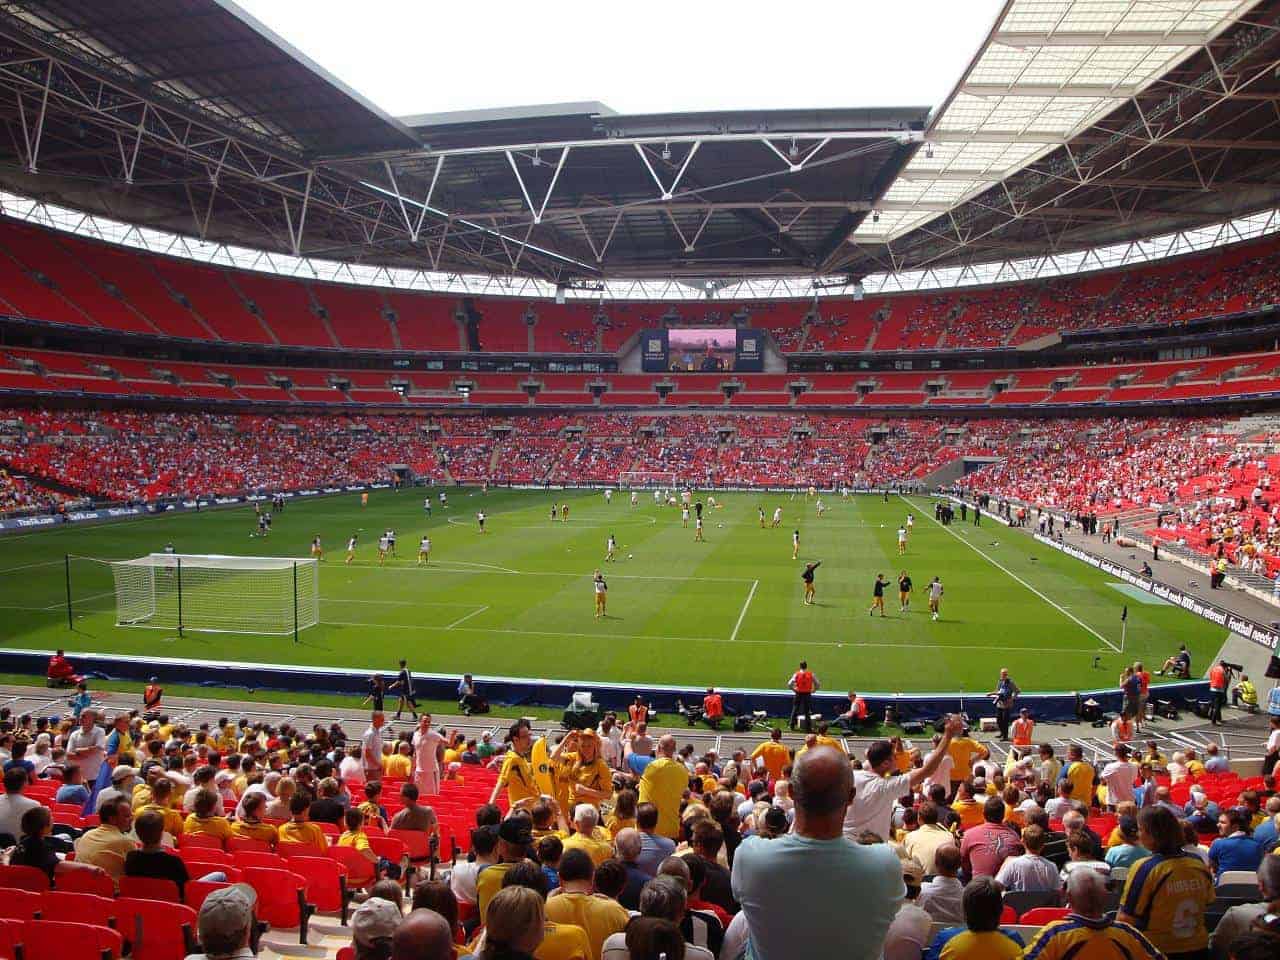 Football matches in London